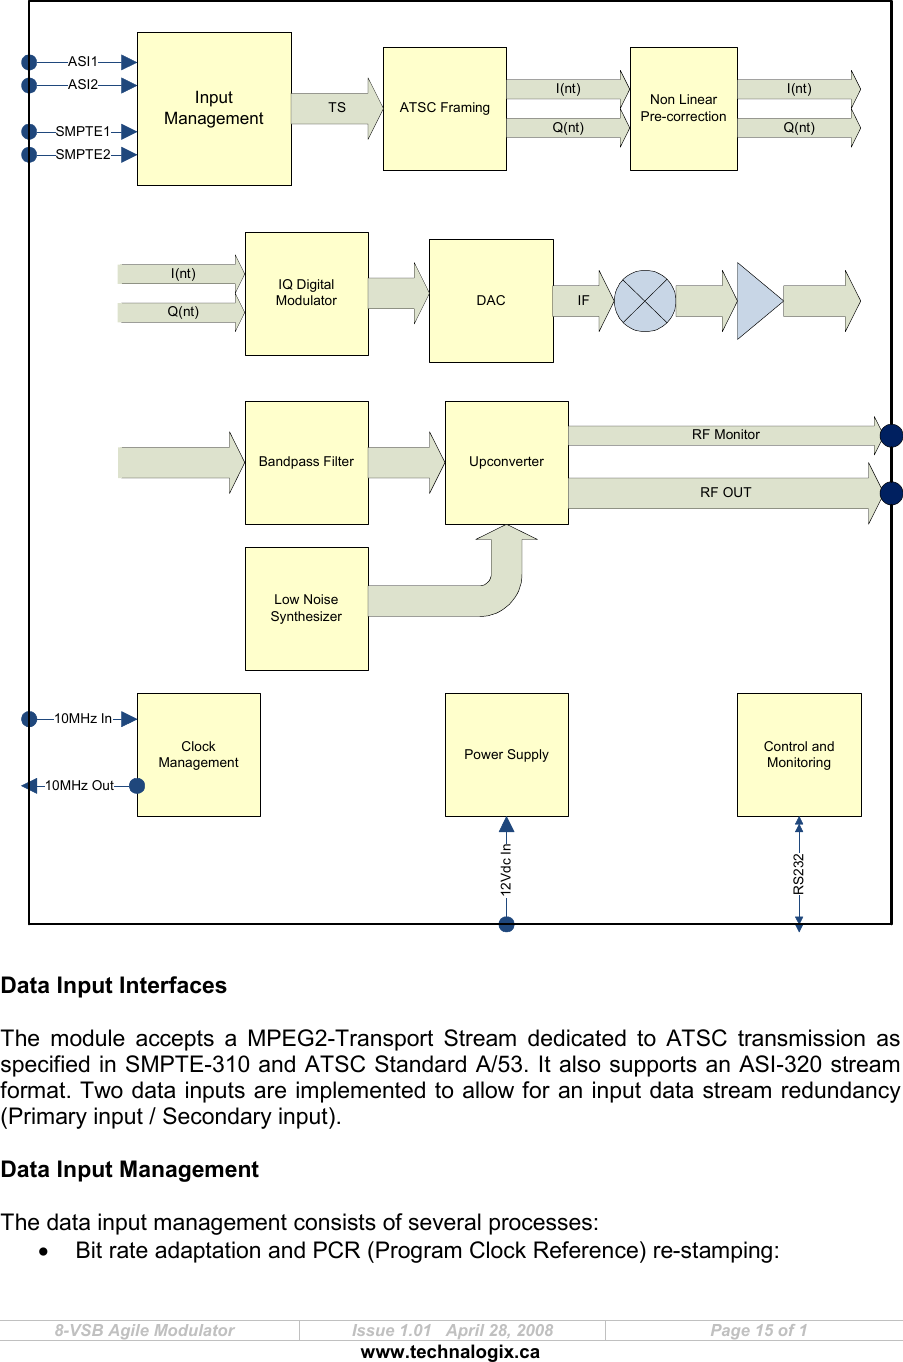  8-VSB Agile Modulator  Issue 1.01   April 28, 2008  Page 15 of 1 www.technalogix.ca                                          Data Input Interfaces  The  module  accepts  a  MPEG2-Transport  Stream  dedicated  to  ATSC  transmission  as specified in SMPTE-310 and ATSC Standard A/53. It also supports an ASI-320 stream format. Two data inputs are implemented to allow for an input data stream redundancy (Primary input / Secondary input).  Data Input Management  The data input management consists of several processes: •  Bit rate adaptation and PCR (Program Clock Reference) re-stamping: Input ManagementATSC Framing Non Linear Pre-correctionASI1ASI2SMPTE1SMPTE2TSI(nt)Q(nt)I(nt)Q(nt)IQ Digital Modulator DACI(nt)Q(nt) IFUpconverterRF OUTBandpass FilterRF MonitorLow Noise SynthesizerPower Supply Control and MonitoringClock Management10MHz In10MHz Out12Vdc InRS232